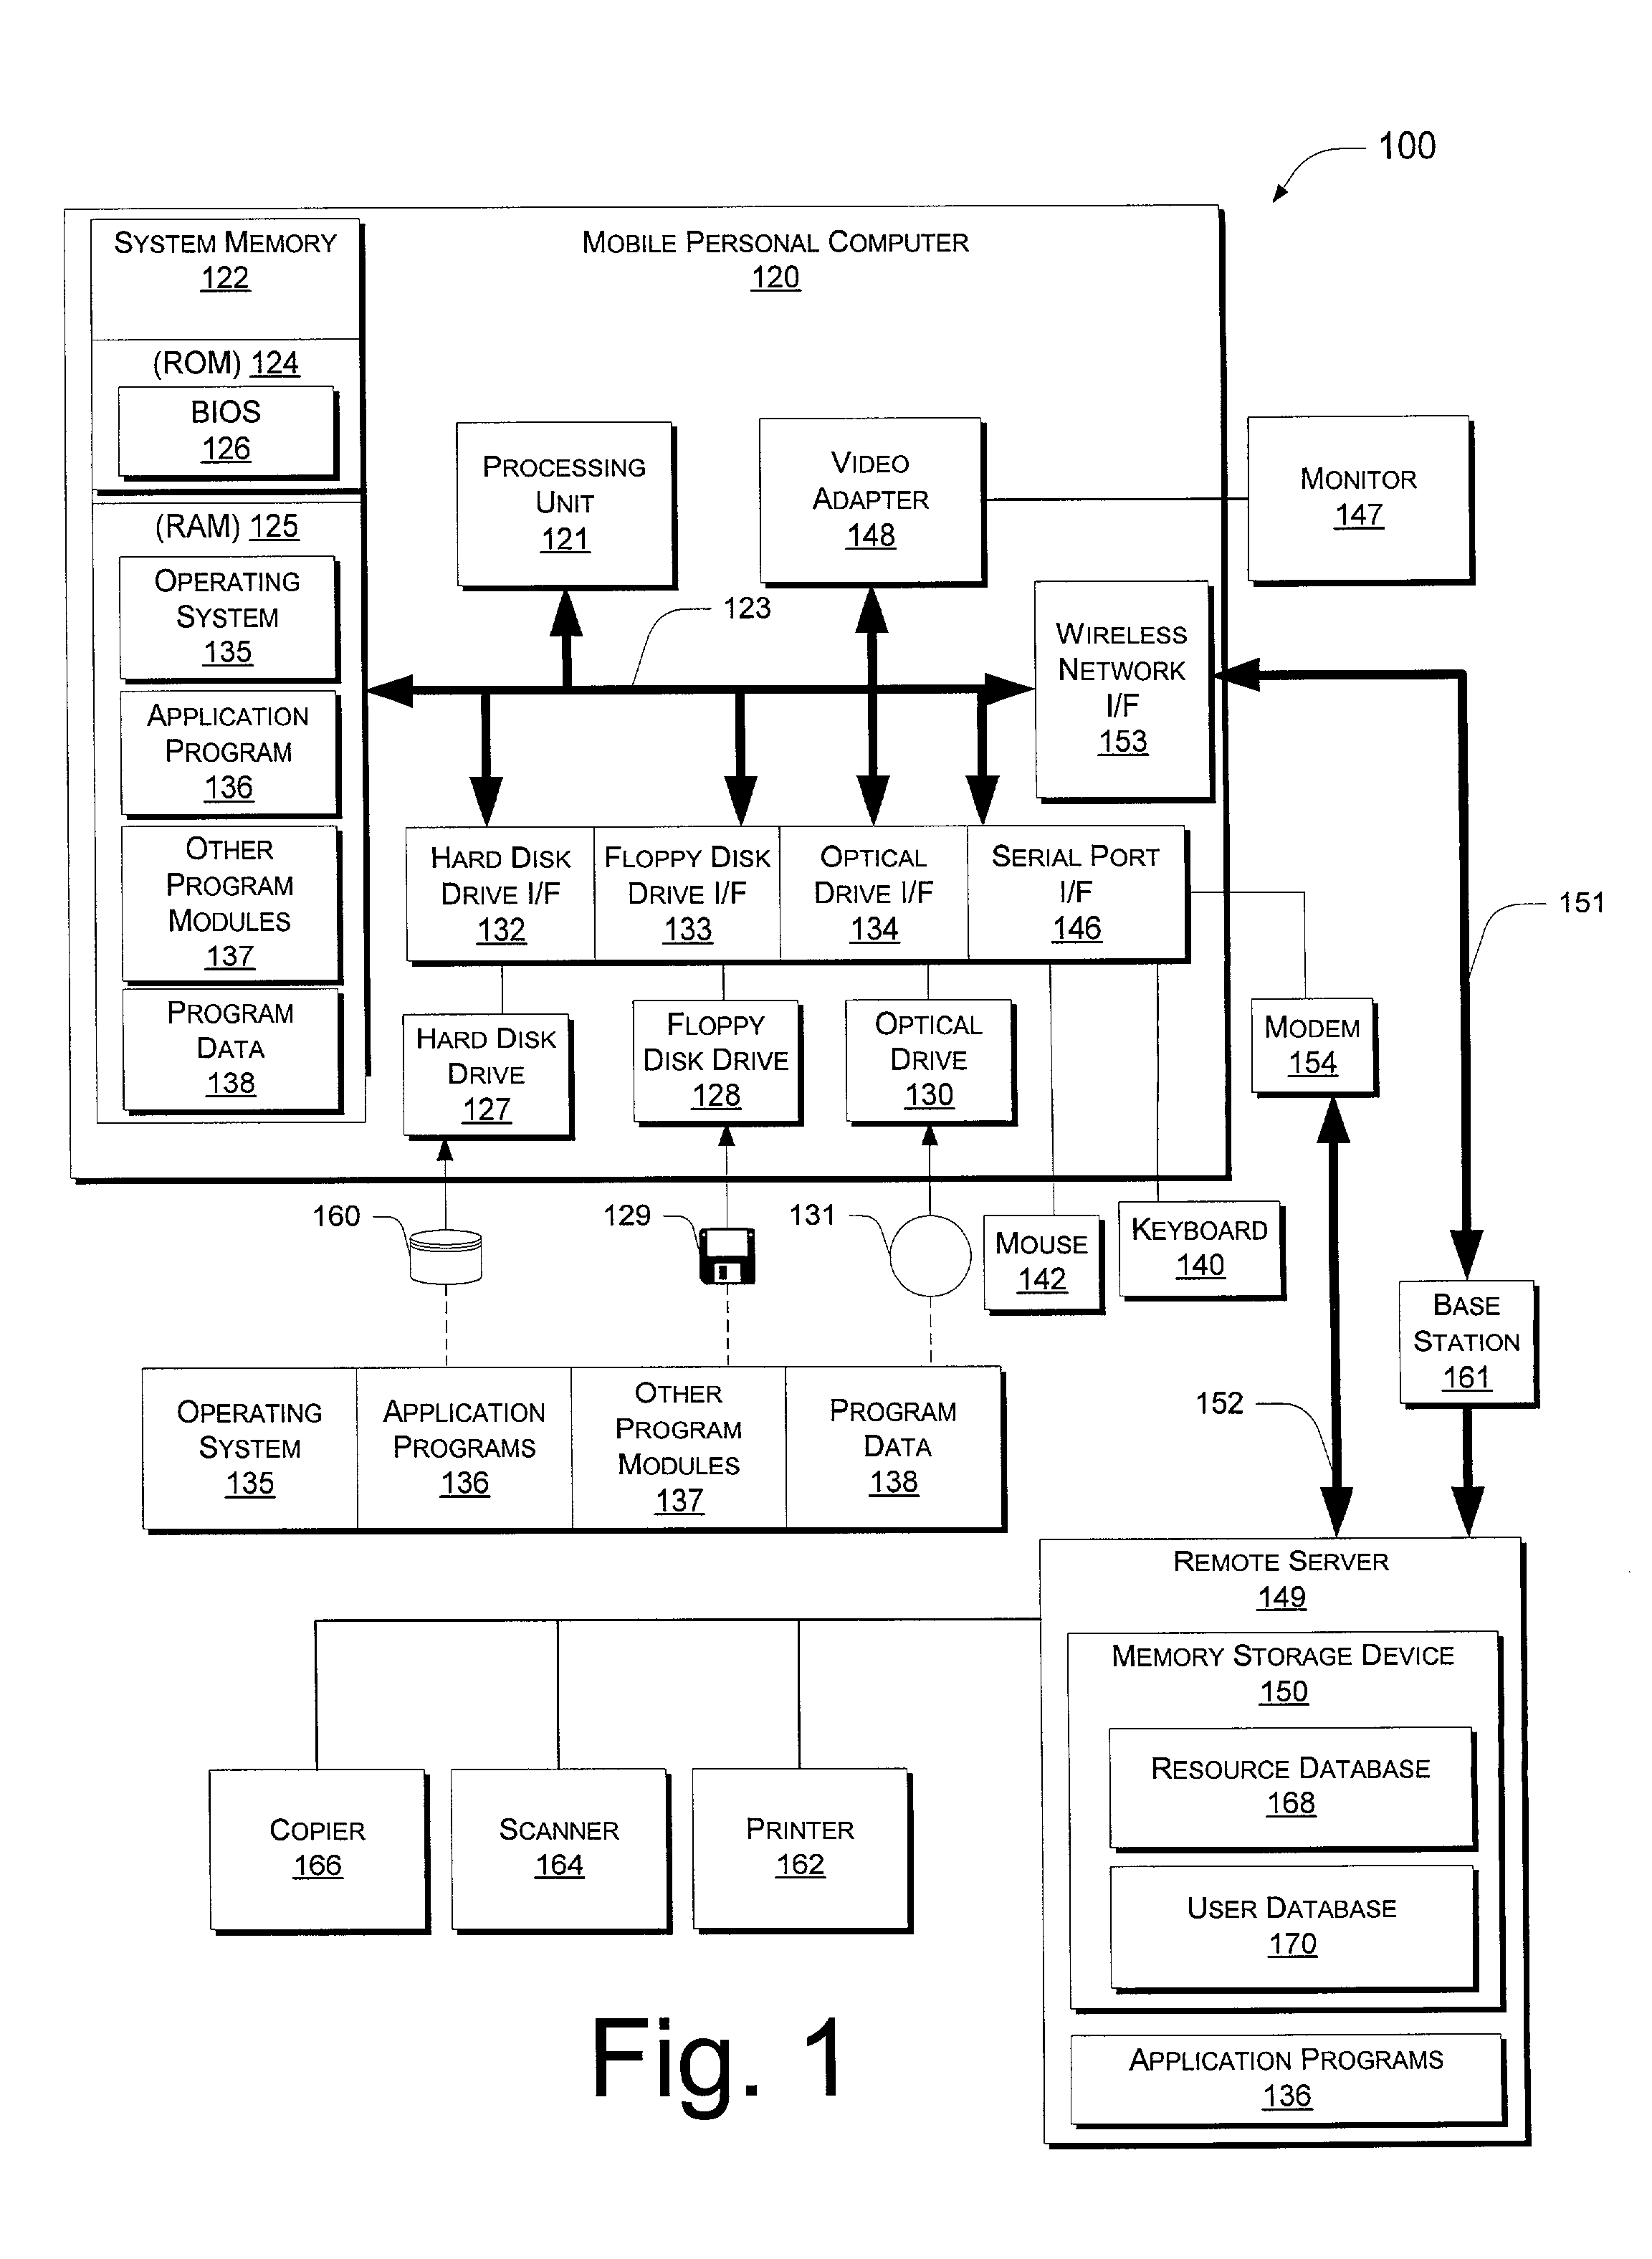 Systems and methods for locating mobile computer users in a wireless network